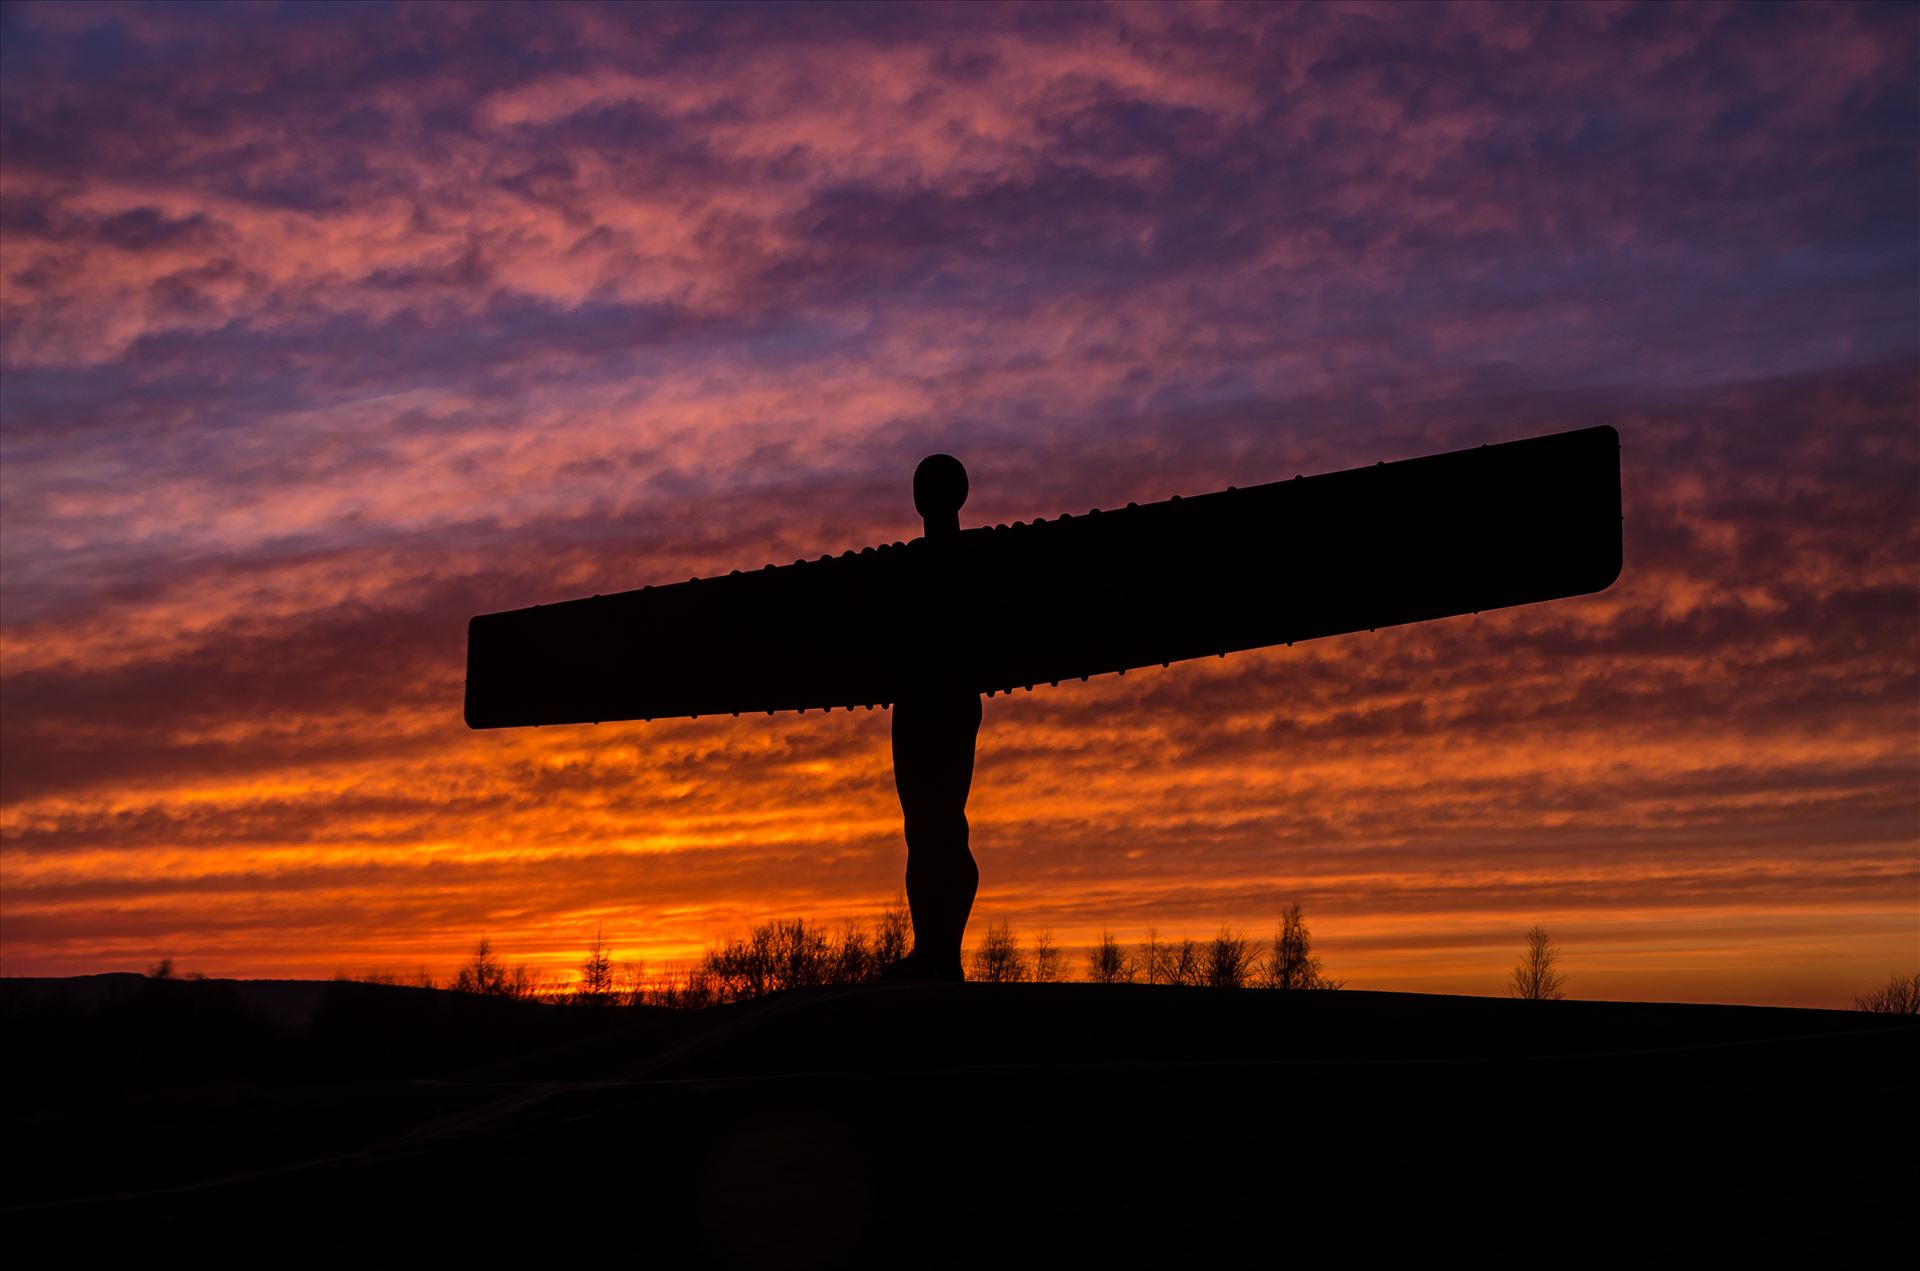 The Angel of the North at sunset The Angel of the North is a contemporary sculpture, designed by Antony Gormley, located in Gateshead,  England.Completed in 1998, it is a steel sculpture of an angel, 20 metres (66 ft) tall, with wings measuring 54 metres (177 ft) across. by philreay